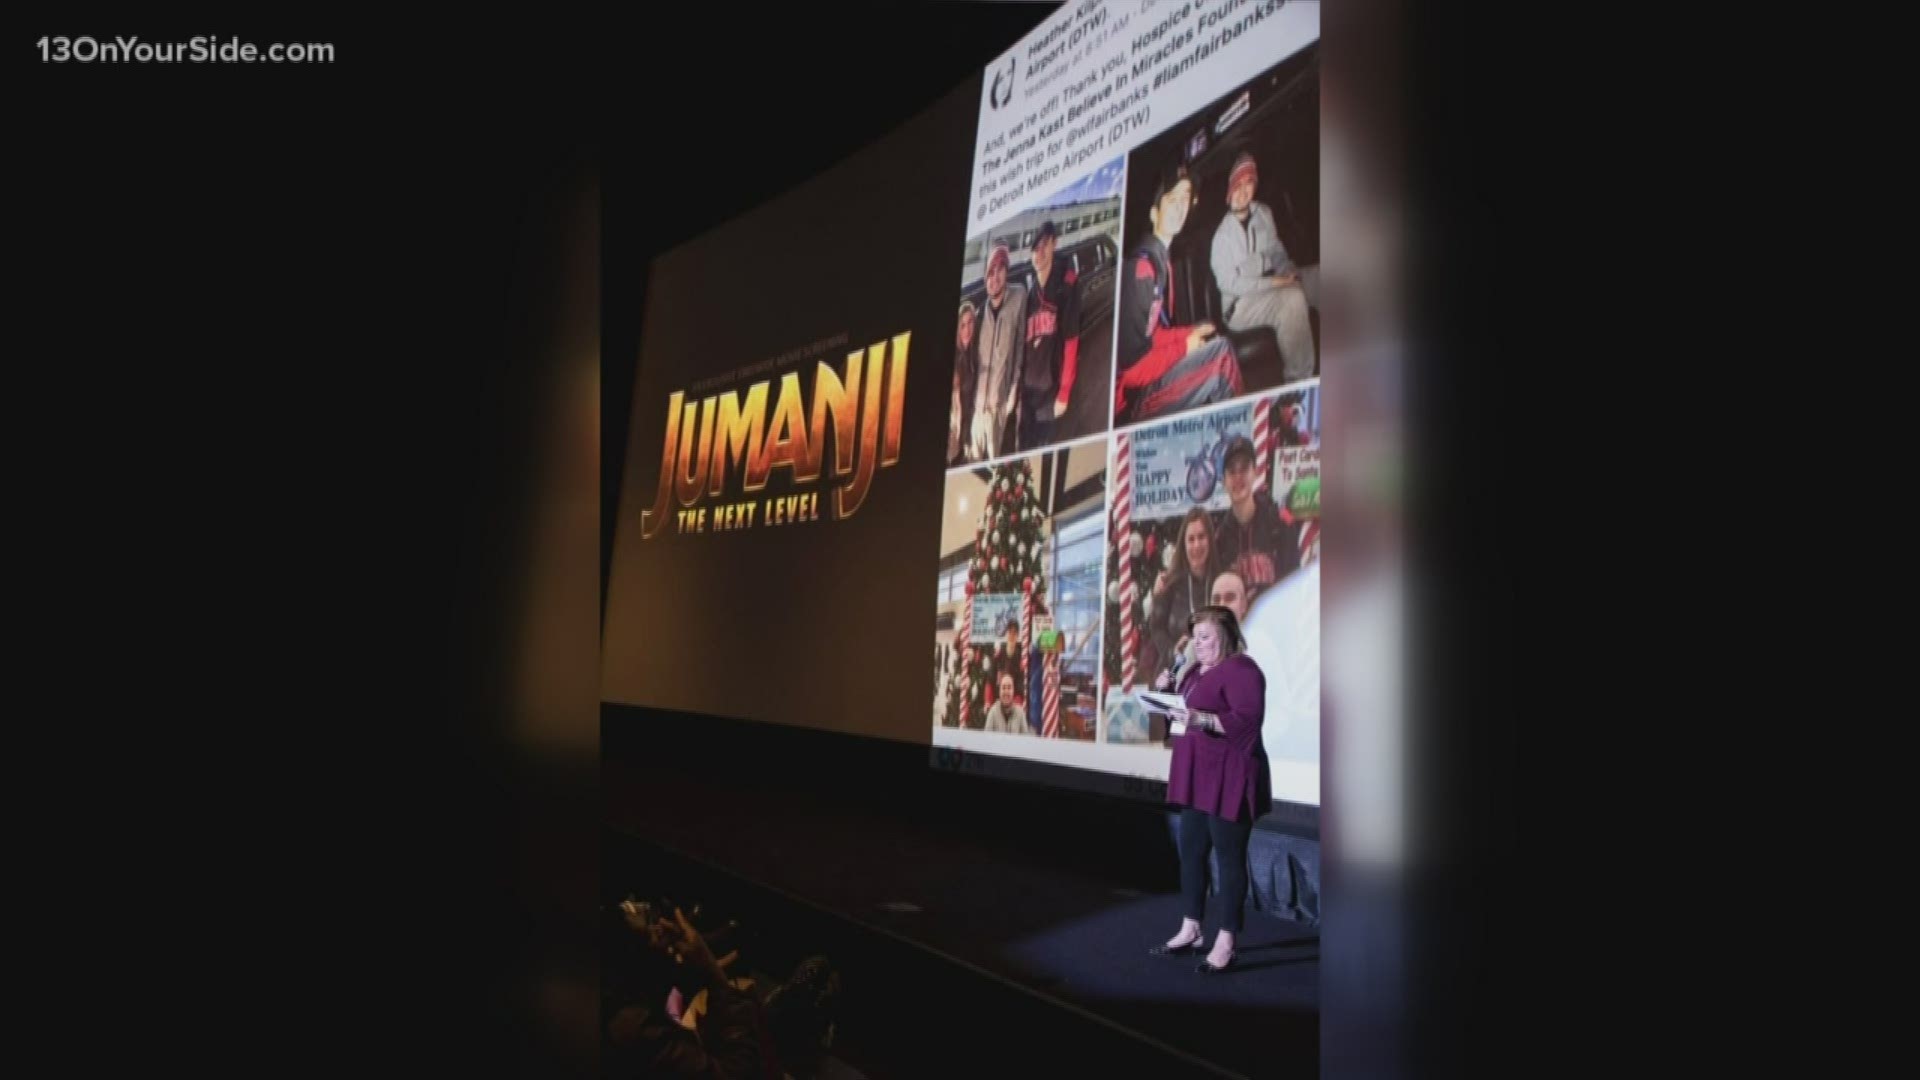 Hospice of Michigan raised $256,000 to support Jo Elyn Nyman Anchors Program for Children during their screenings of Jumanji: The Next Level.